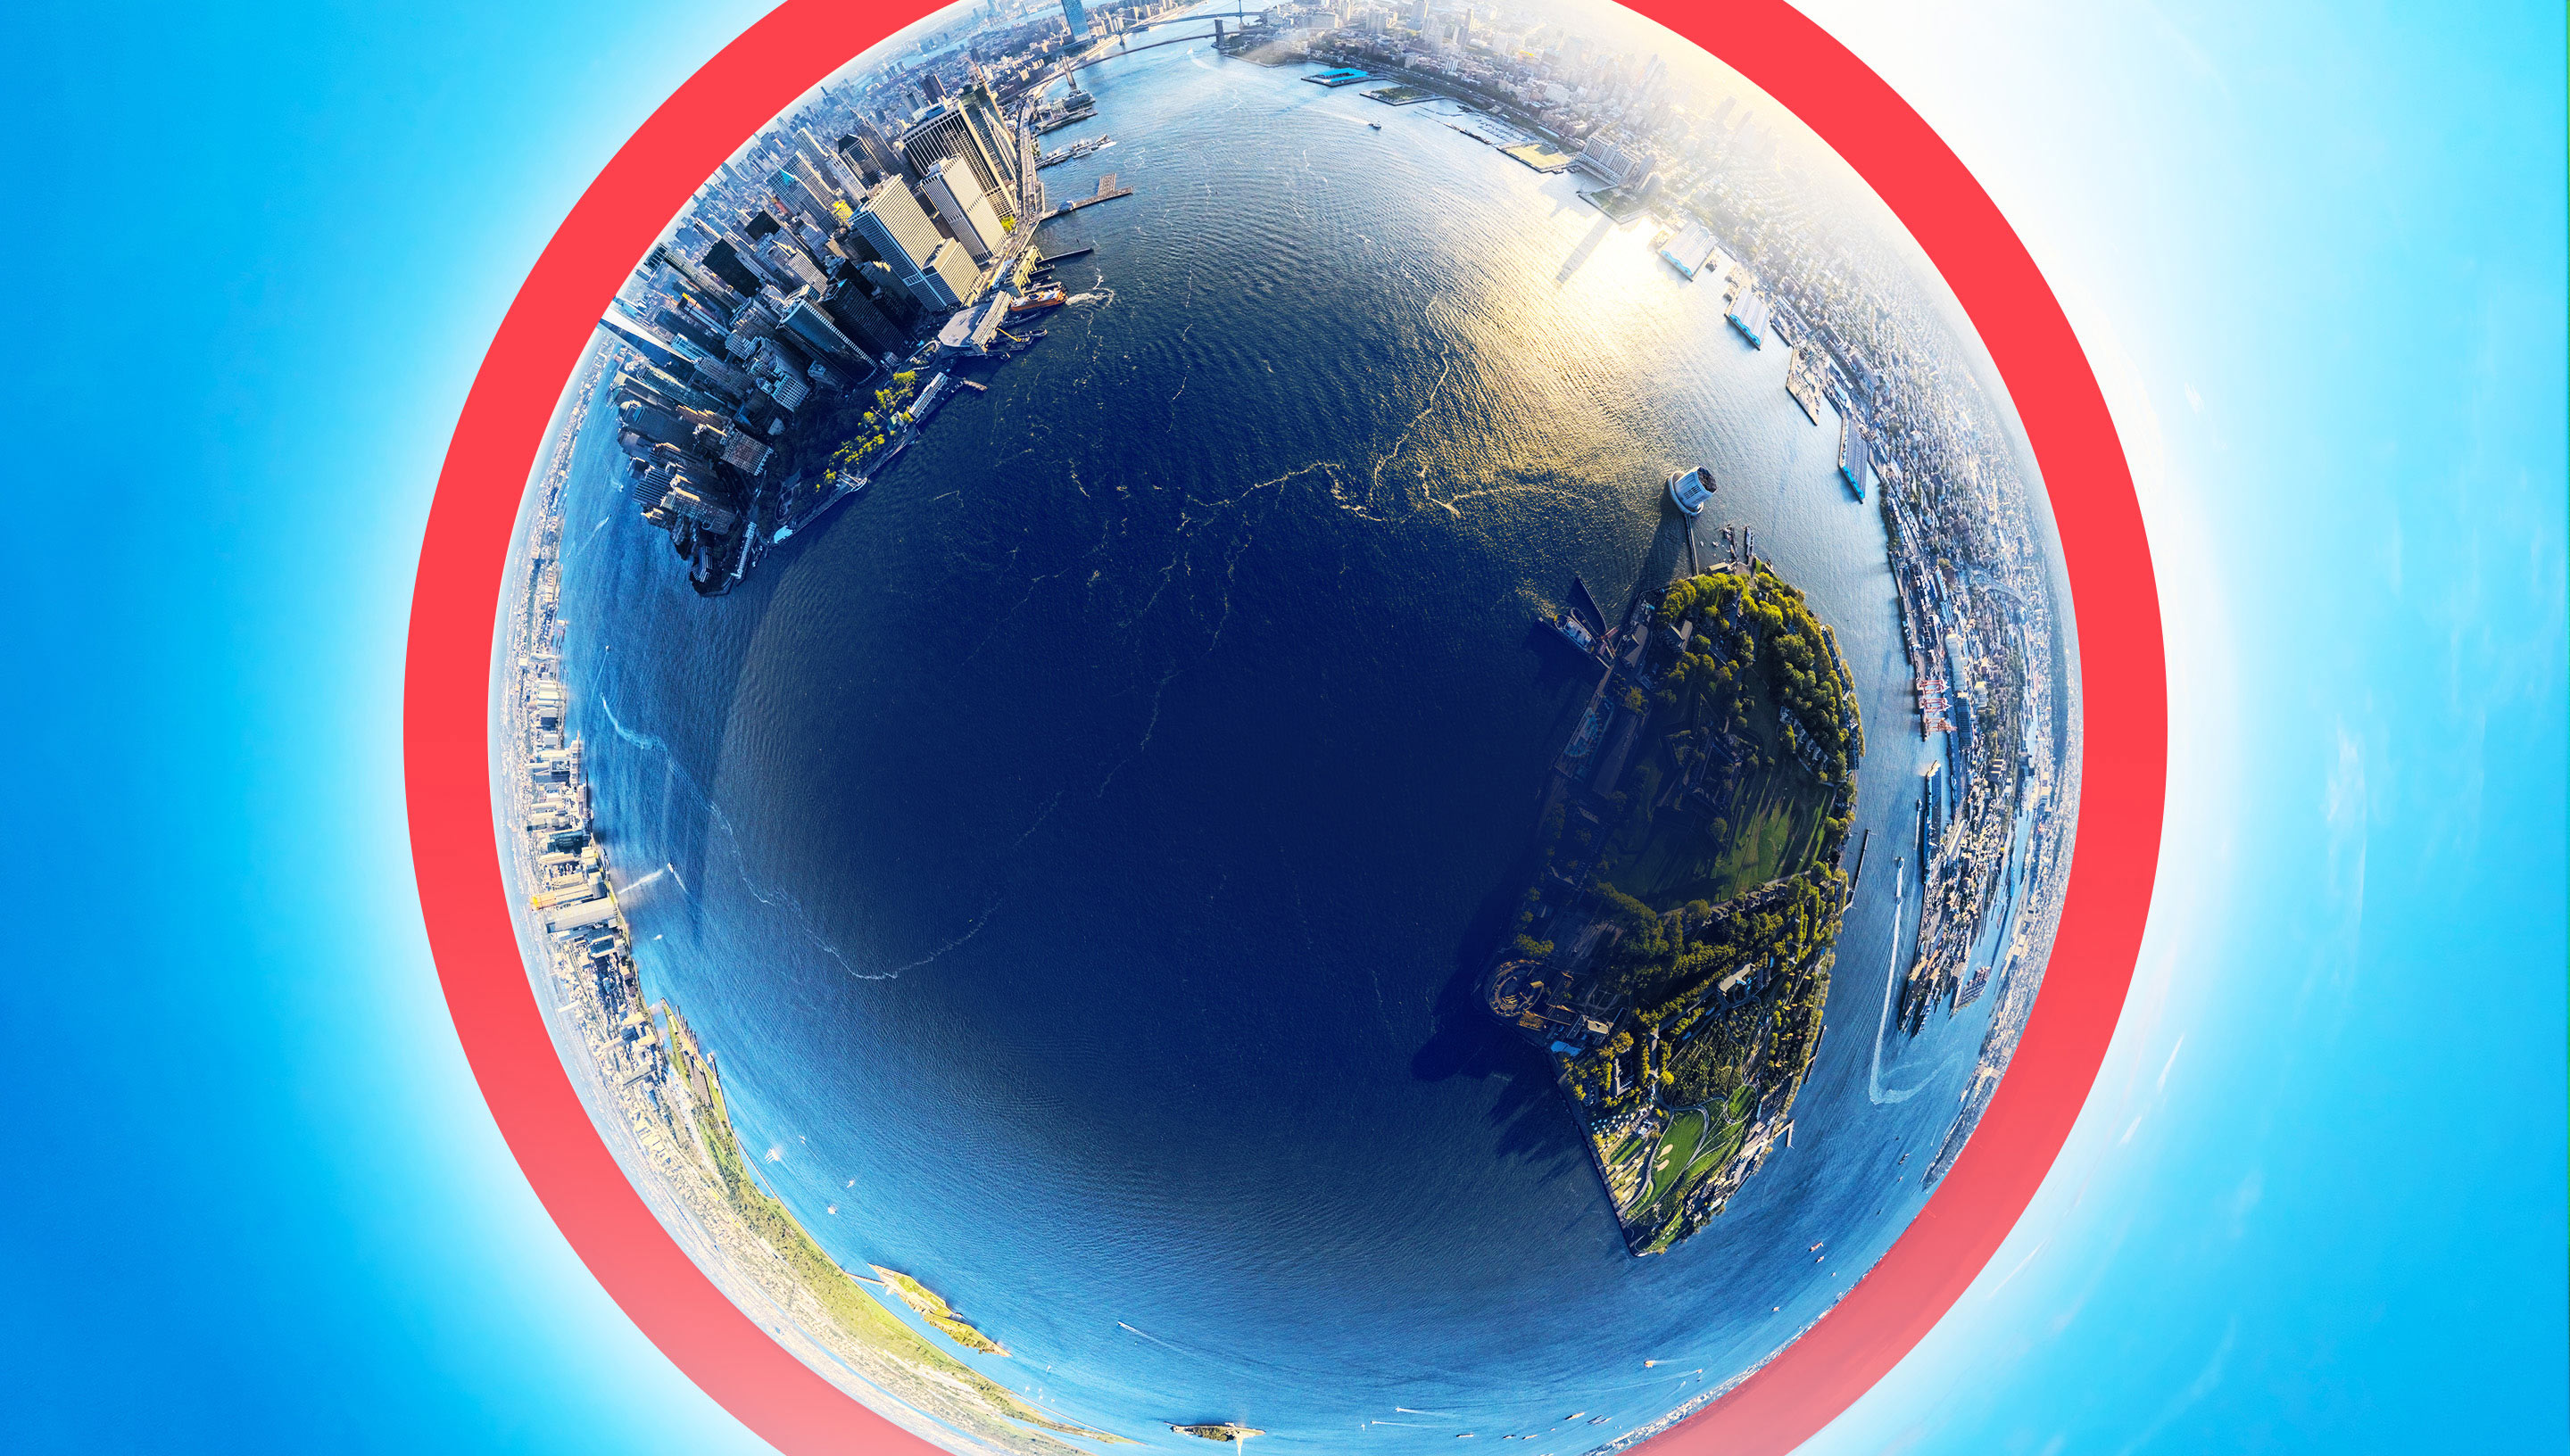 Panorama of a city at sunrise in a spherical globe shape framed by our red aperture